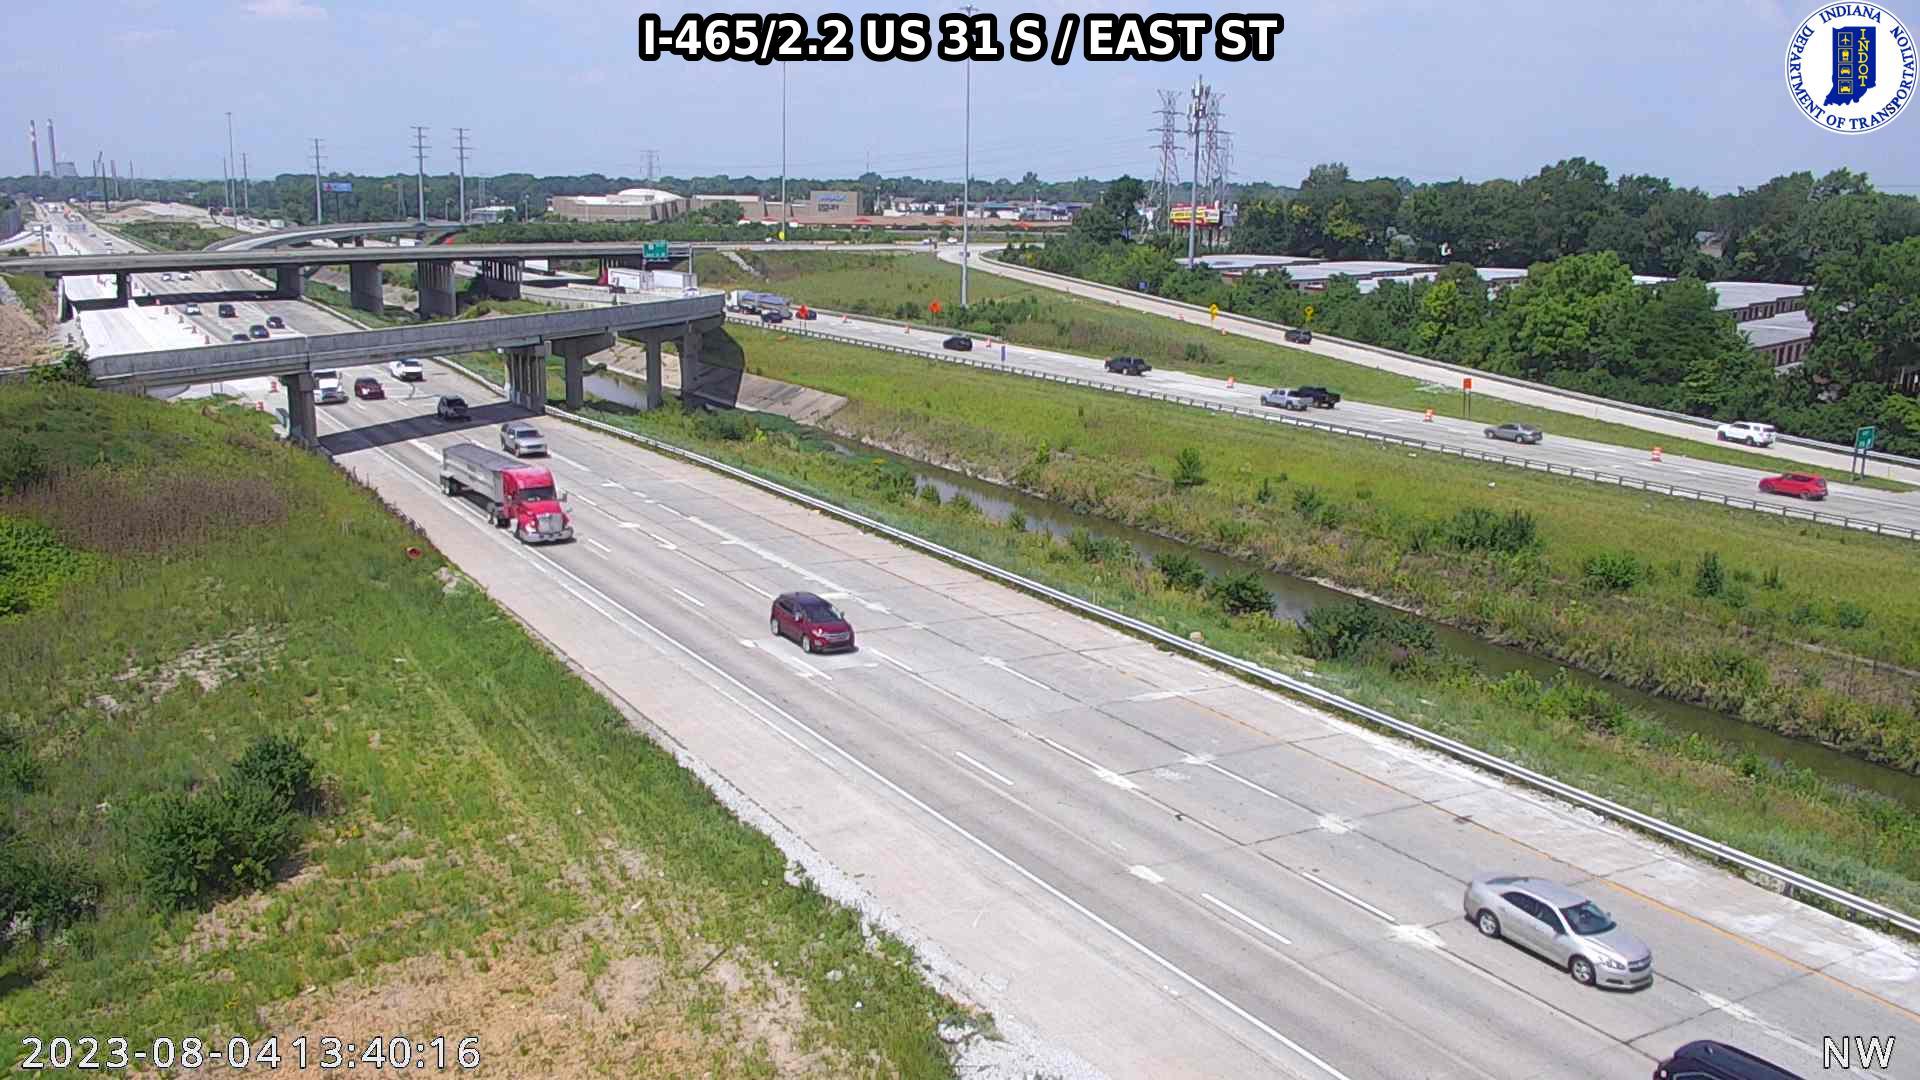 Traffic Cam Indianapolis: I-465: I-465/2.2 US 31 S - EAST ST Player